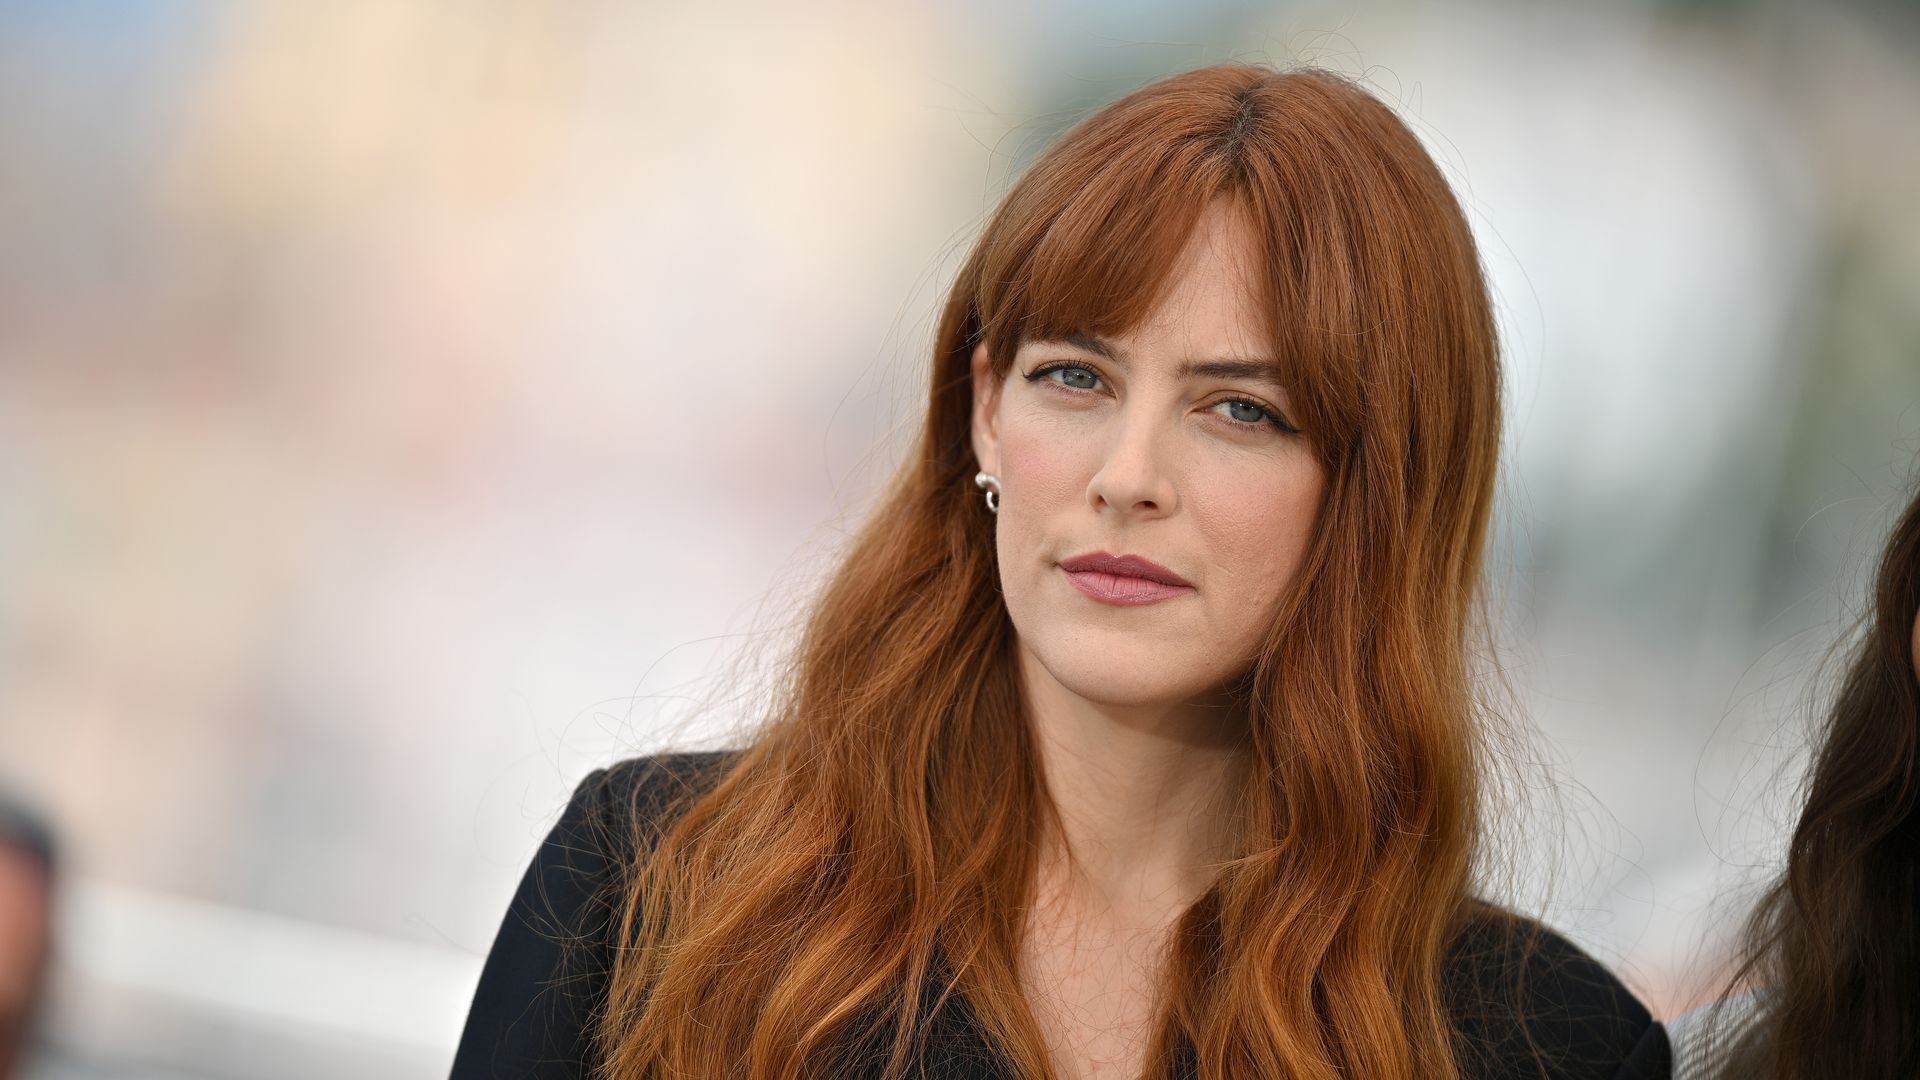 Riley Keough attends the photocall for "War Pony" during the 75th annual Cannes film festival at Palais des Festivals on May 21, 2022 in Cannes, France